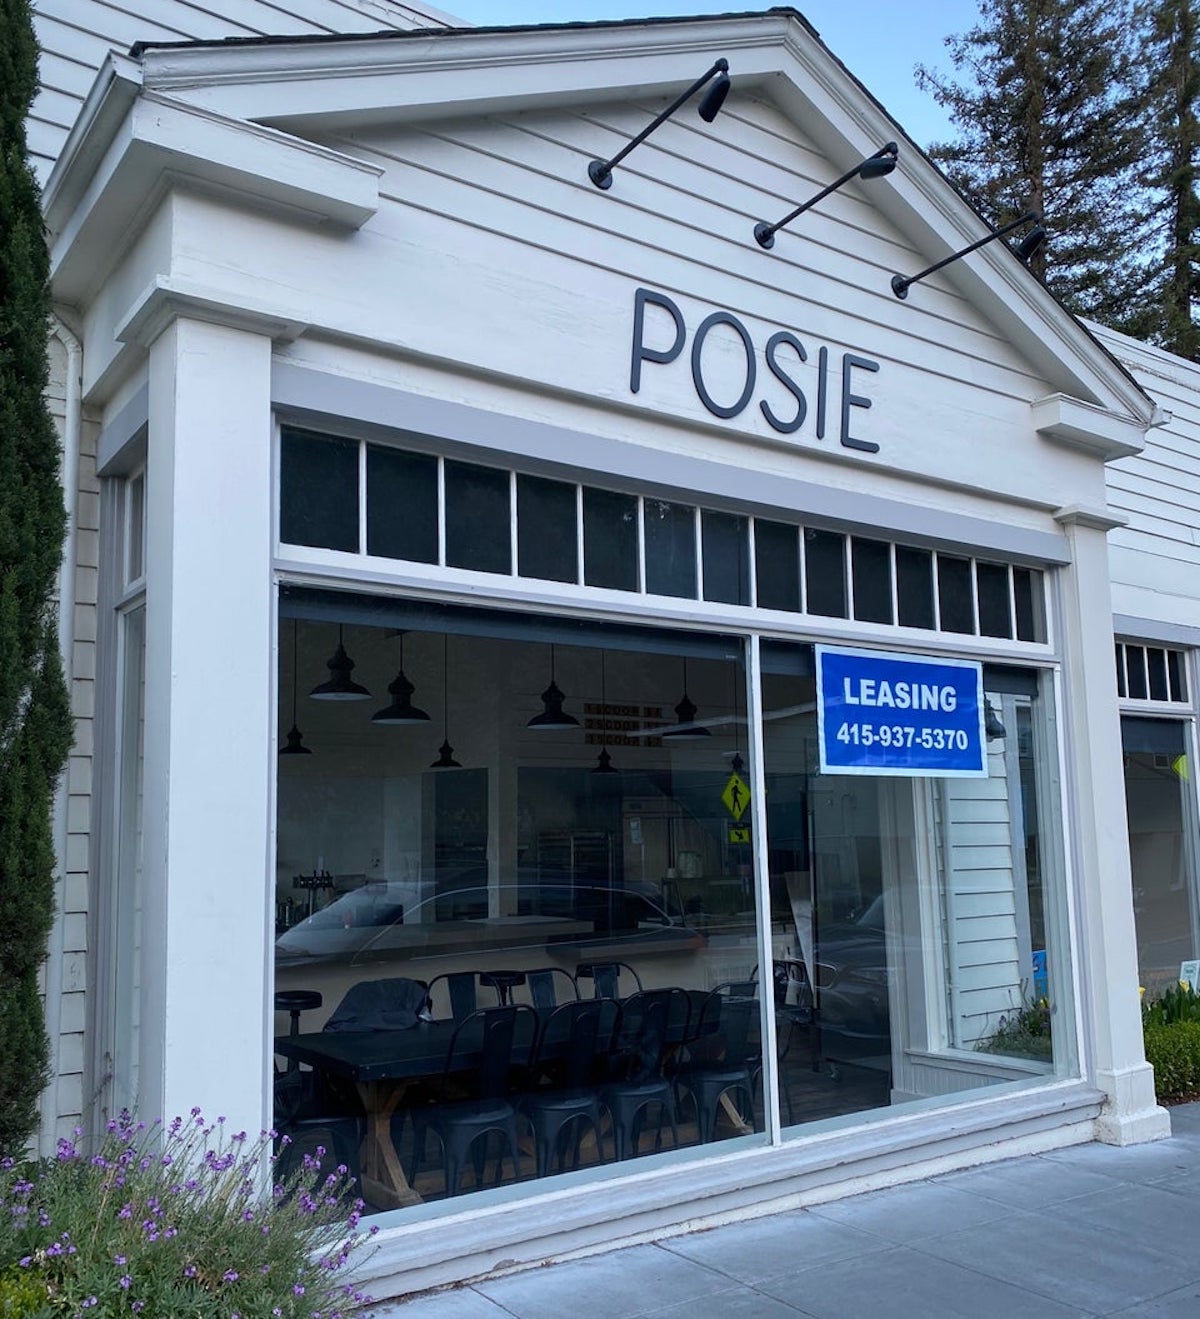 Japanese Eatery Set To Replace Recently-Shuttered Posie Ice Cream Shop in Larkspur